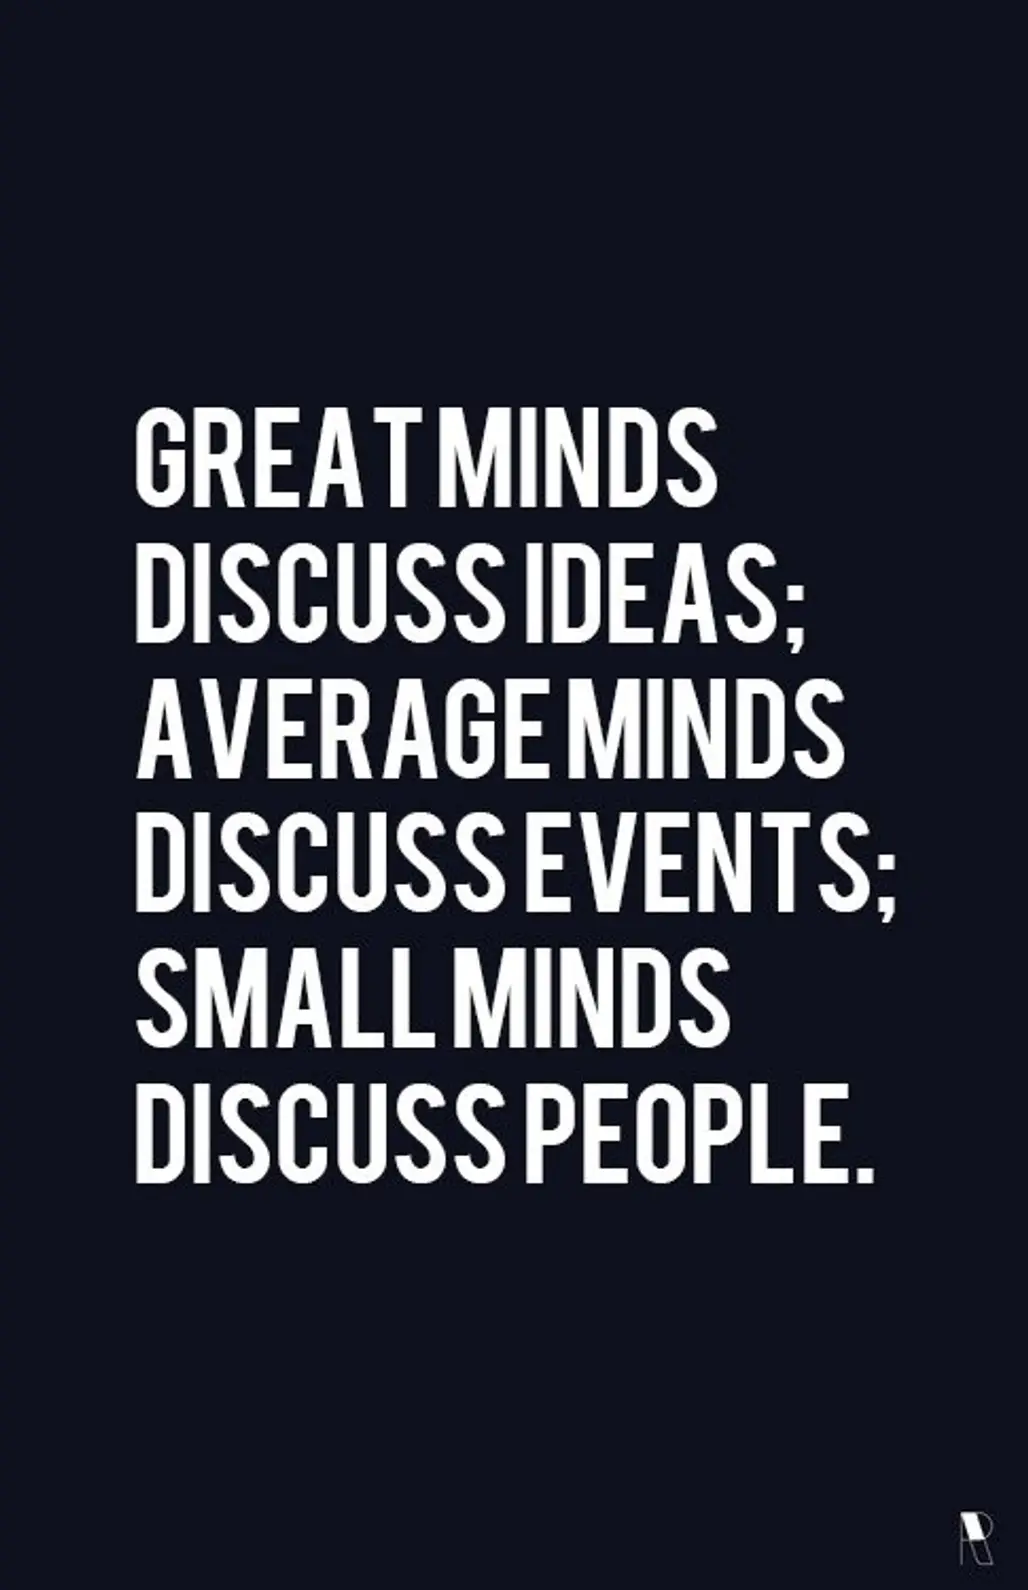 “Great Minds Discuss Ideas; Average Minds Discuss Events; Small Minds Discuss People.”